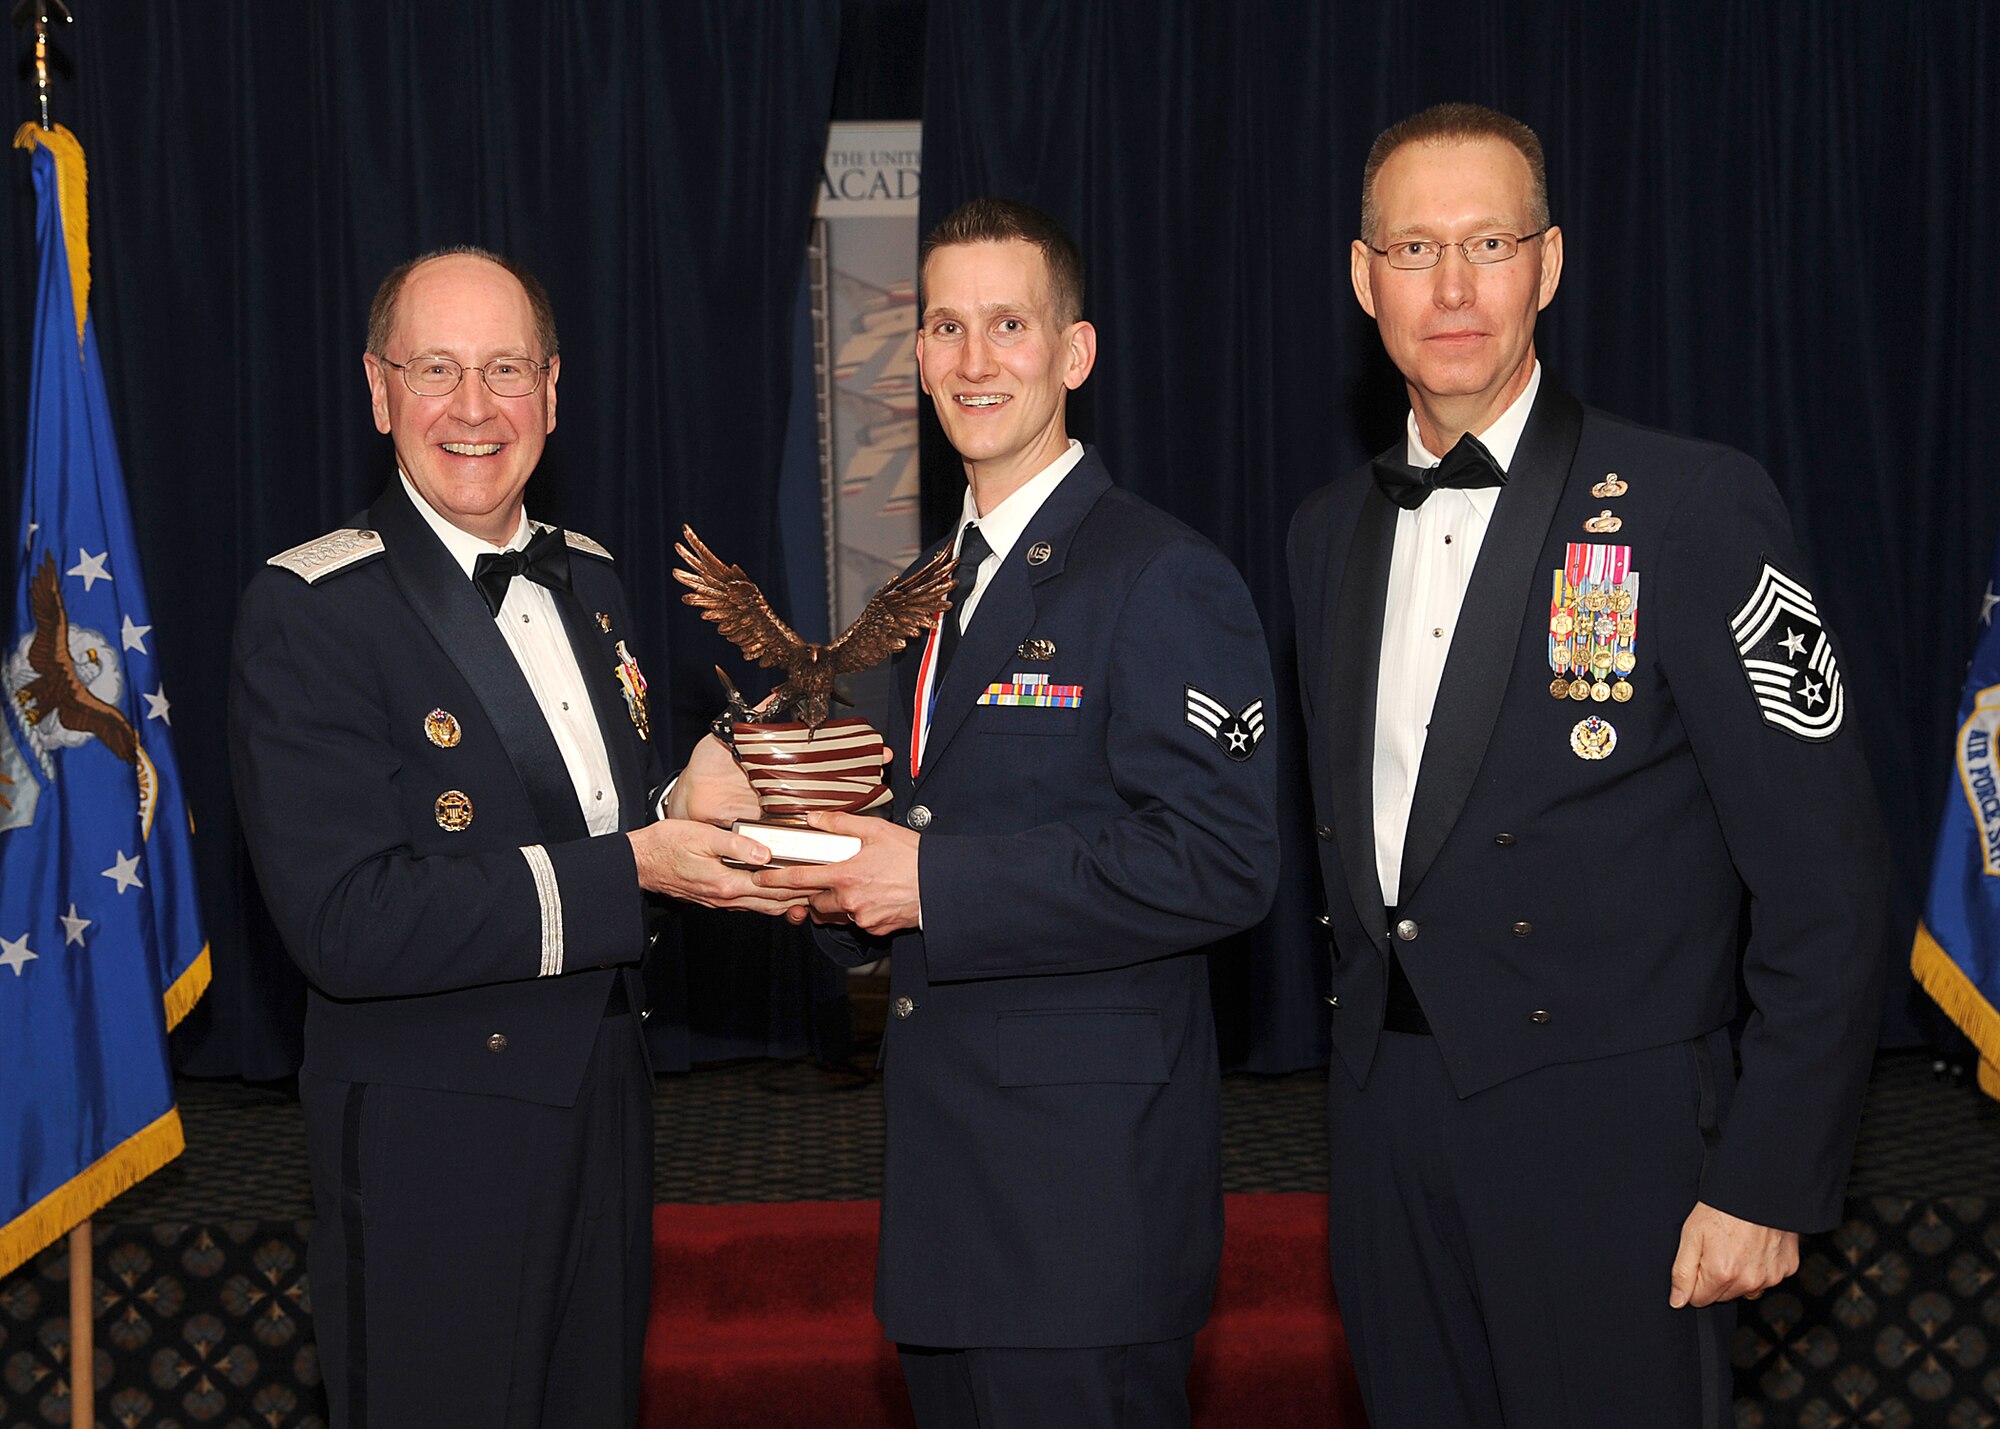 PETERSON AIR FORCE BASE, Colo. -- Senior Airman Robert Kafka accepts his 2009 Air Force Space Command Airman of the Year trophy from Gen. C. Robert Kehler, AFSPC commander, and Chief Master Sgt. Richard Small, AFSPC command chief, during an awards banquet April 9. (U.S. Air Force photo by Tech. Sgt. Matthew Lohr) 